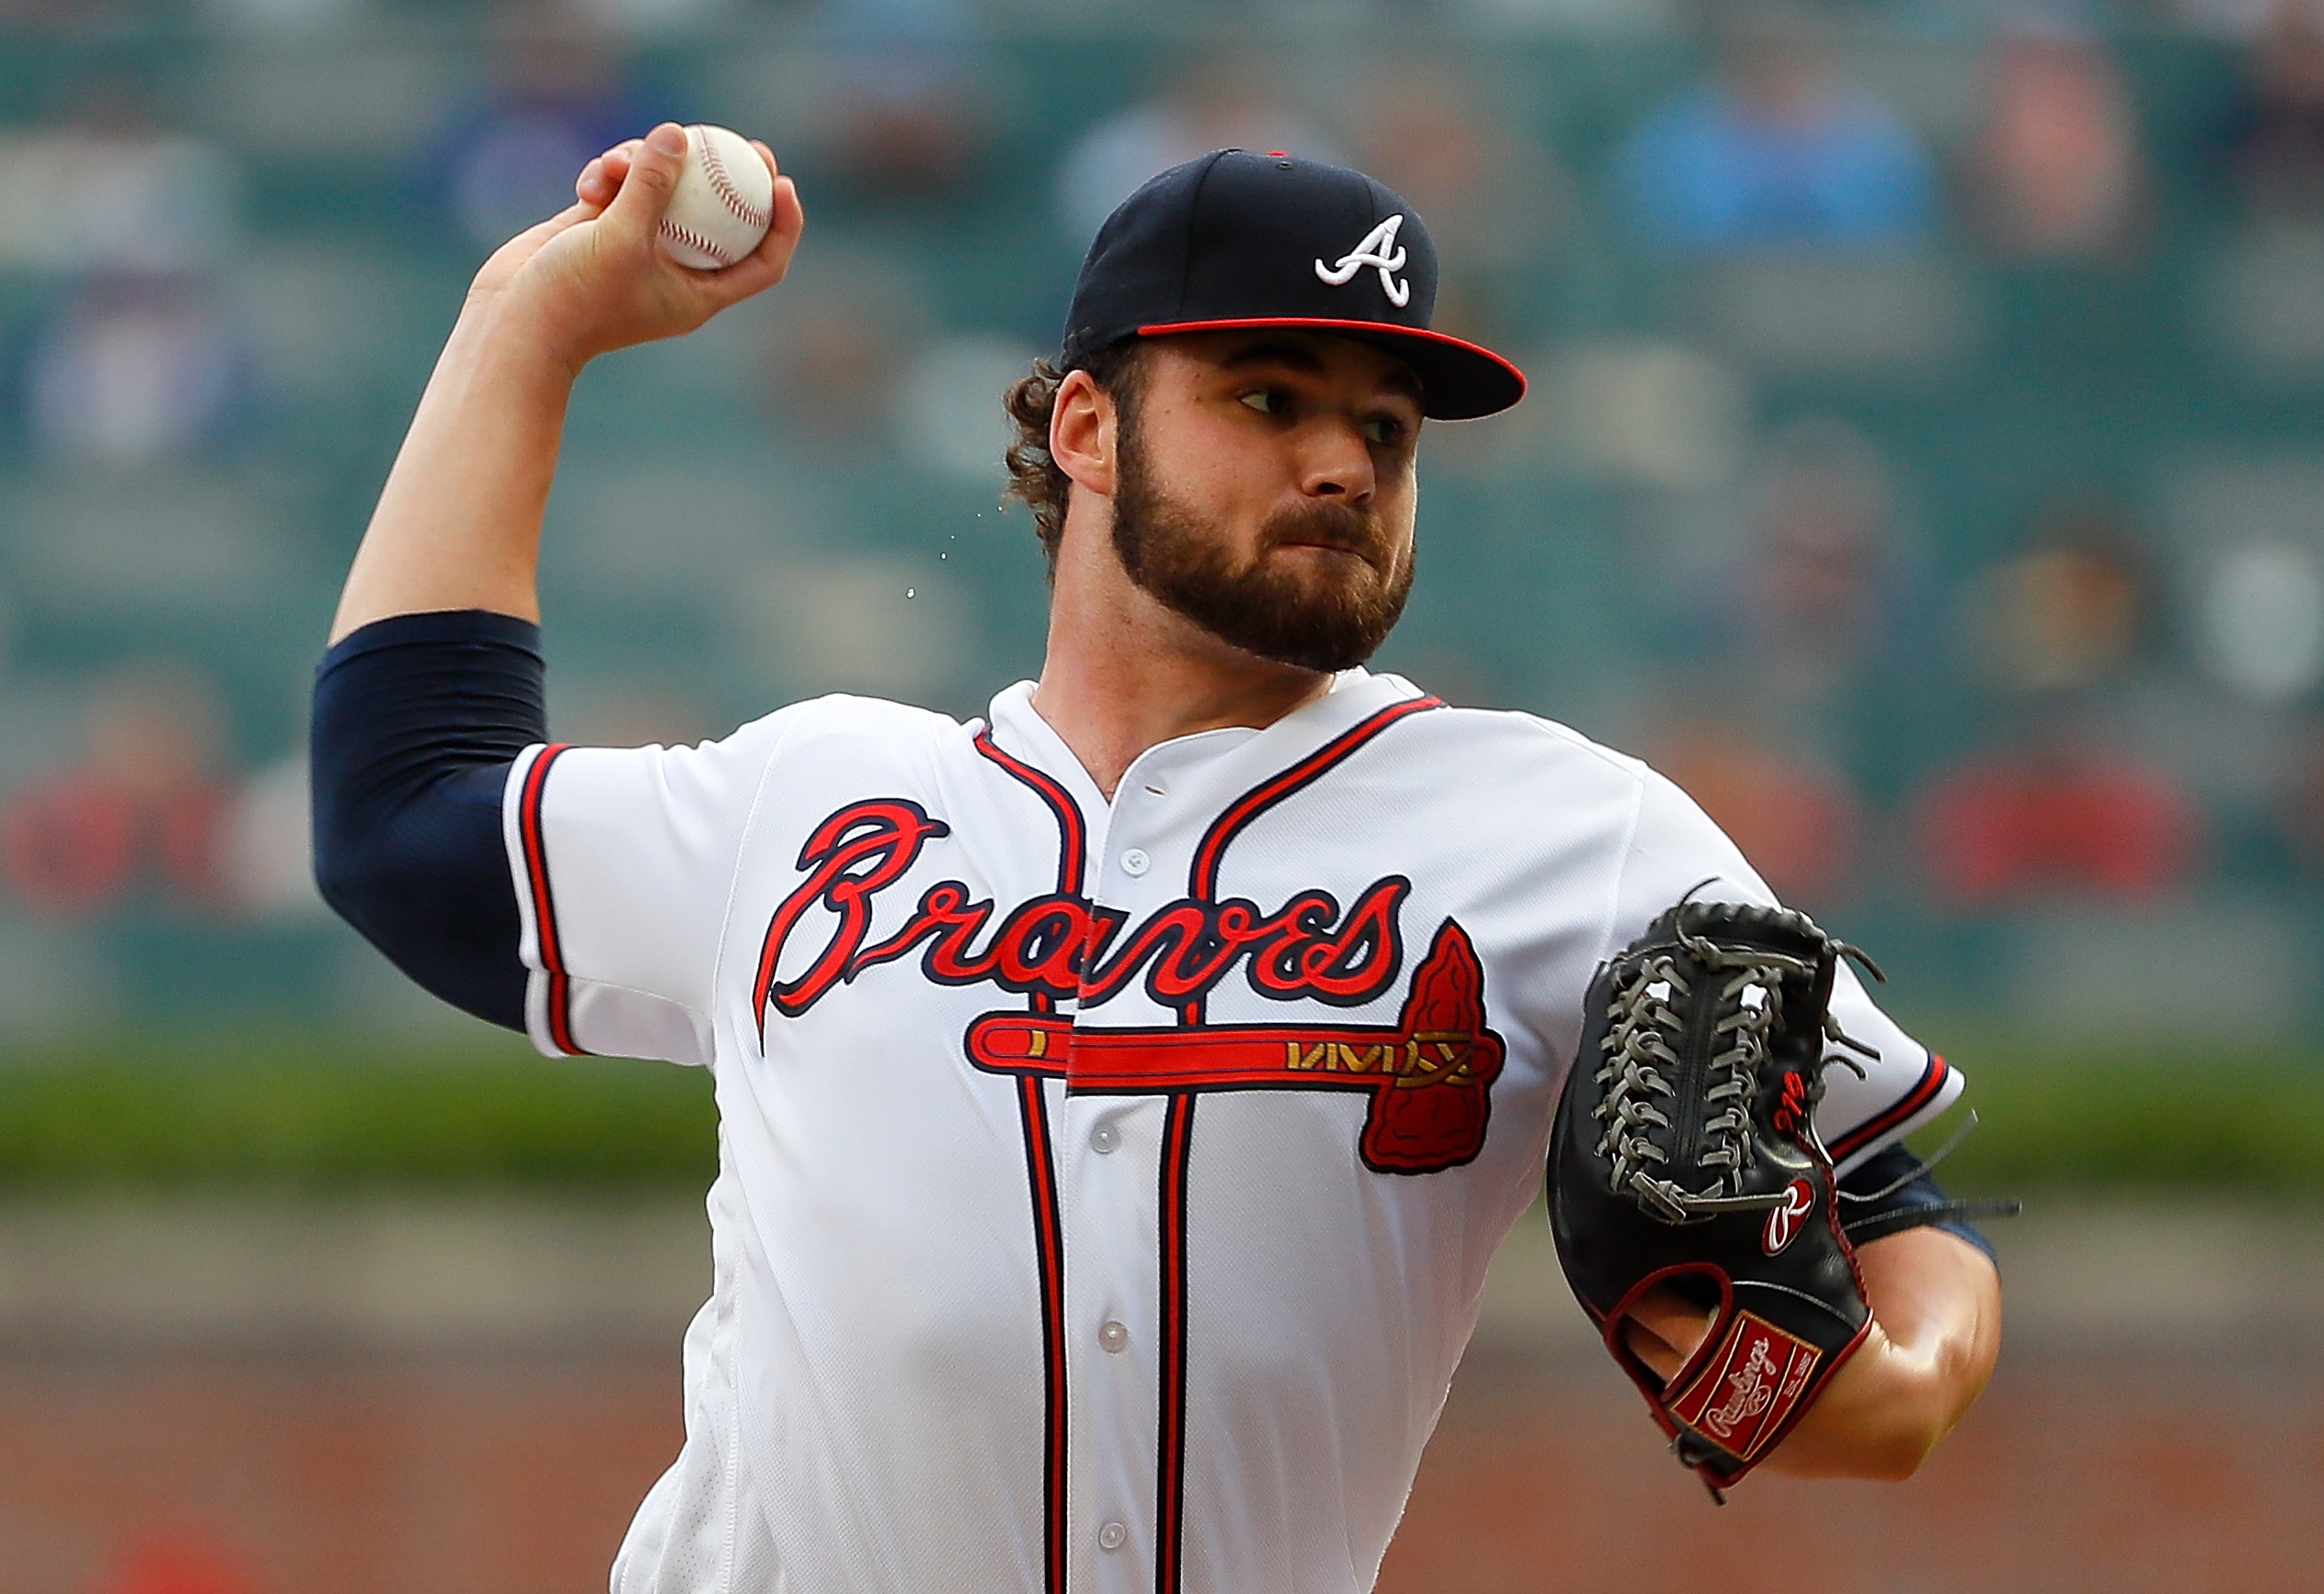 Five tools don't mean a thing': Freddie Freeman reveals Dansby